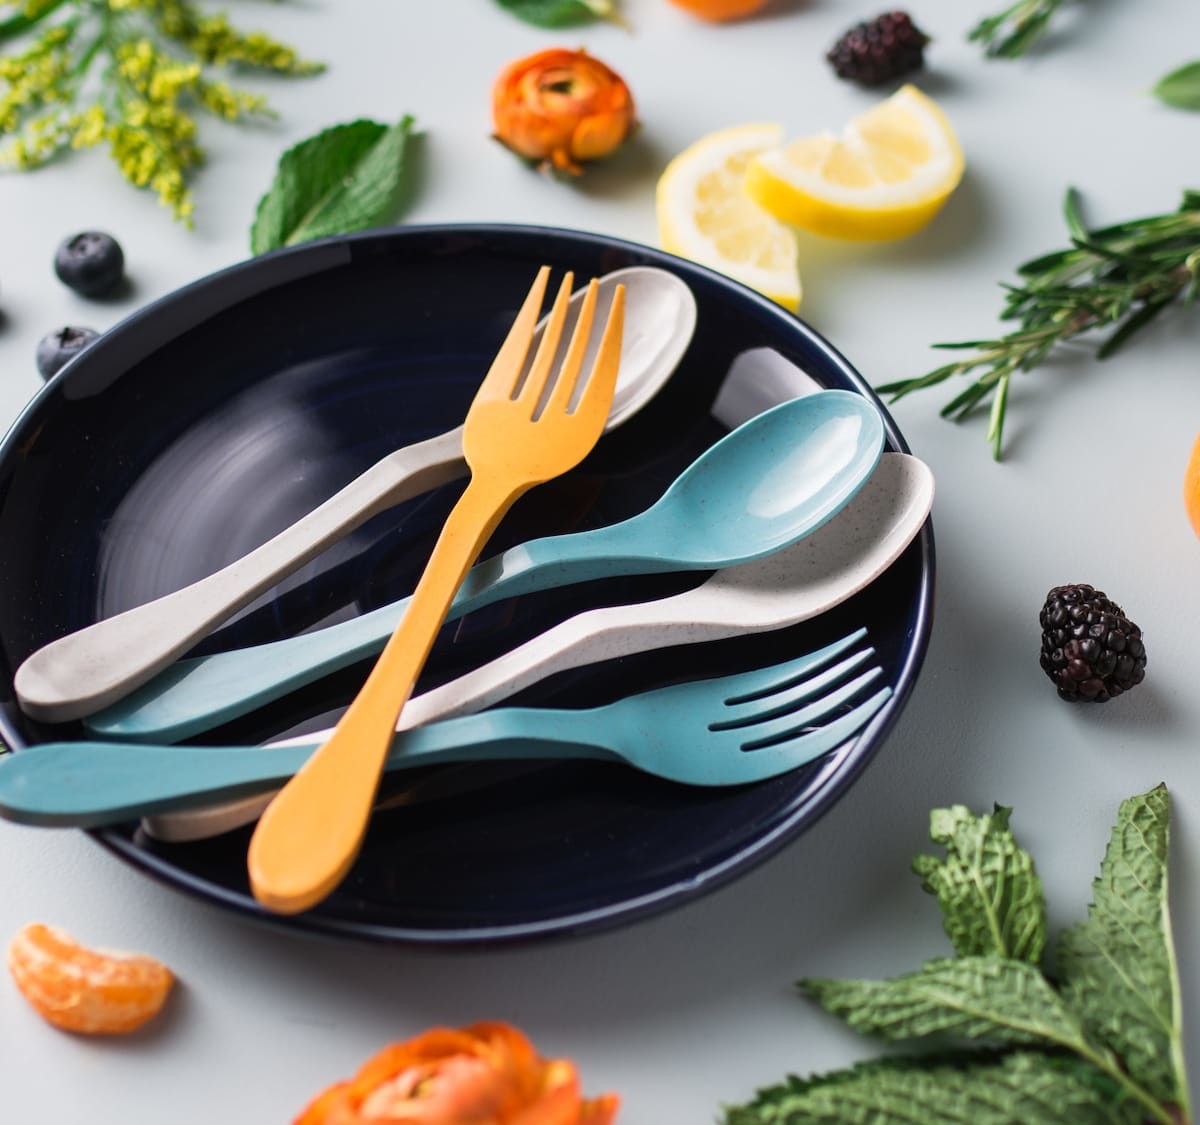 ECO kitchen cutlery sets are made from sugarcane and bamboo to limit single-use plastics